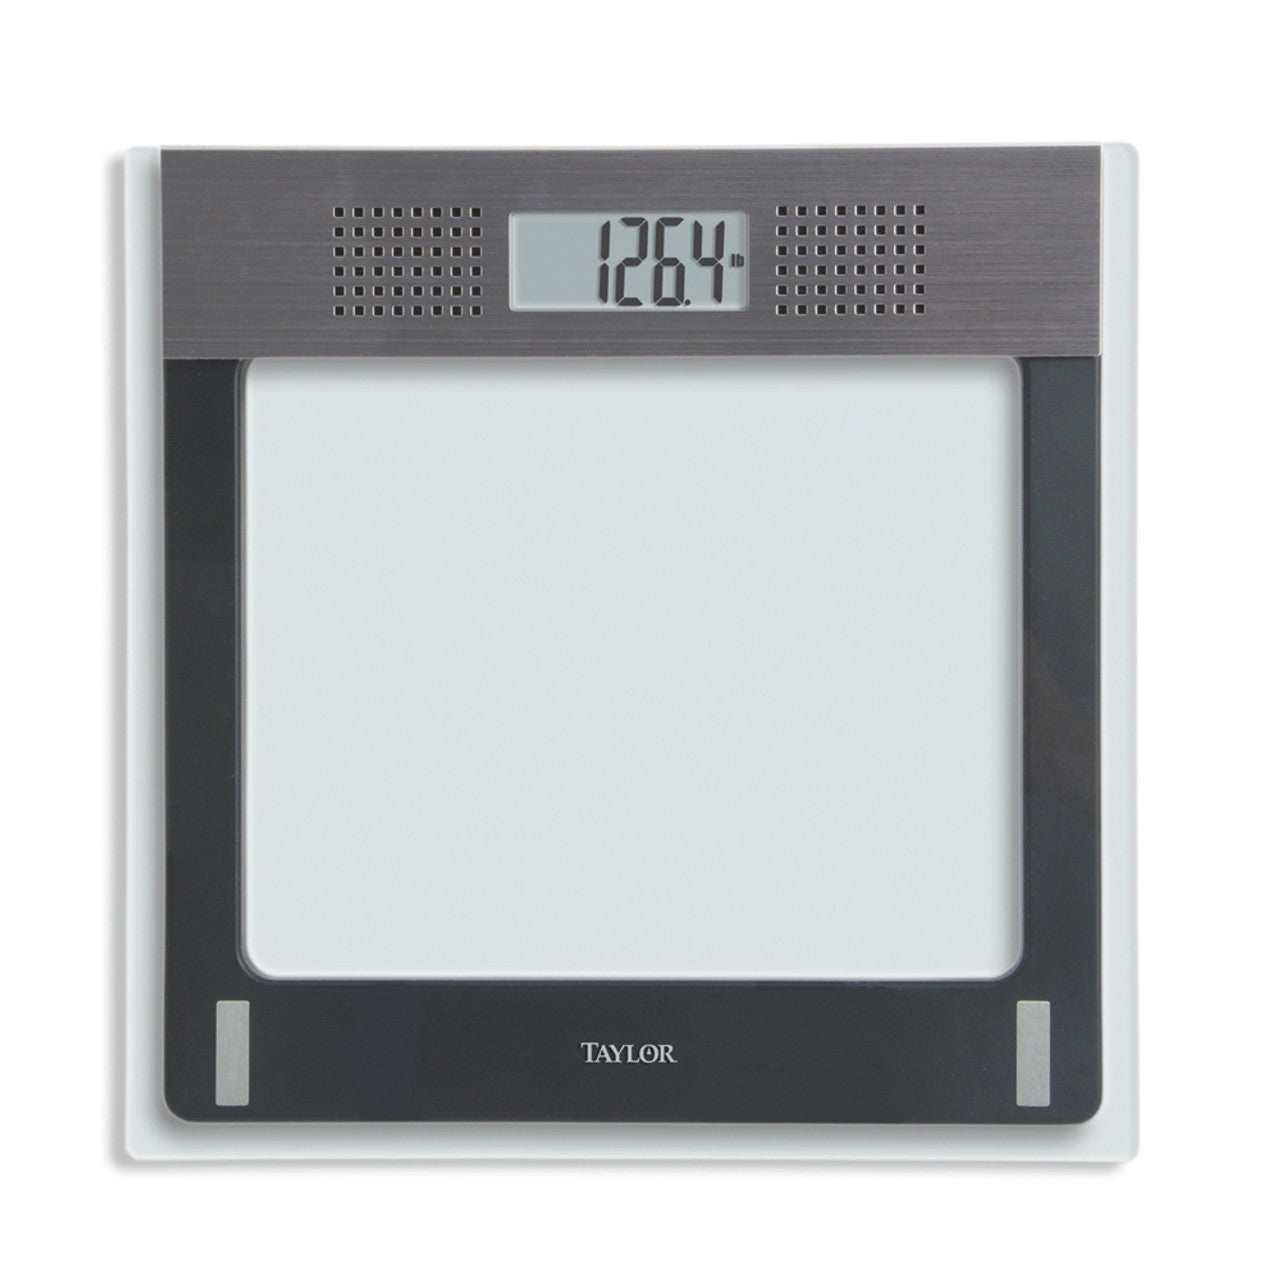 Talking body scale by taylor has Sleek Glass design, outtlind in black and gray giveing high contrast. The display at the to has a read out of 126.4 lbs 